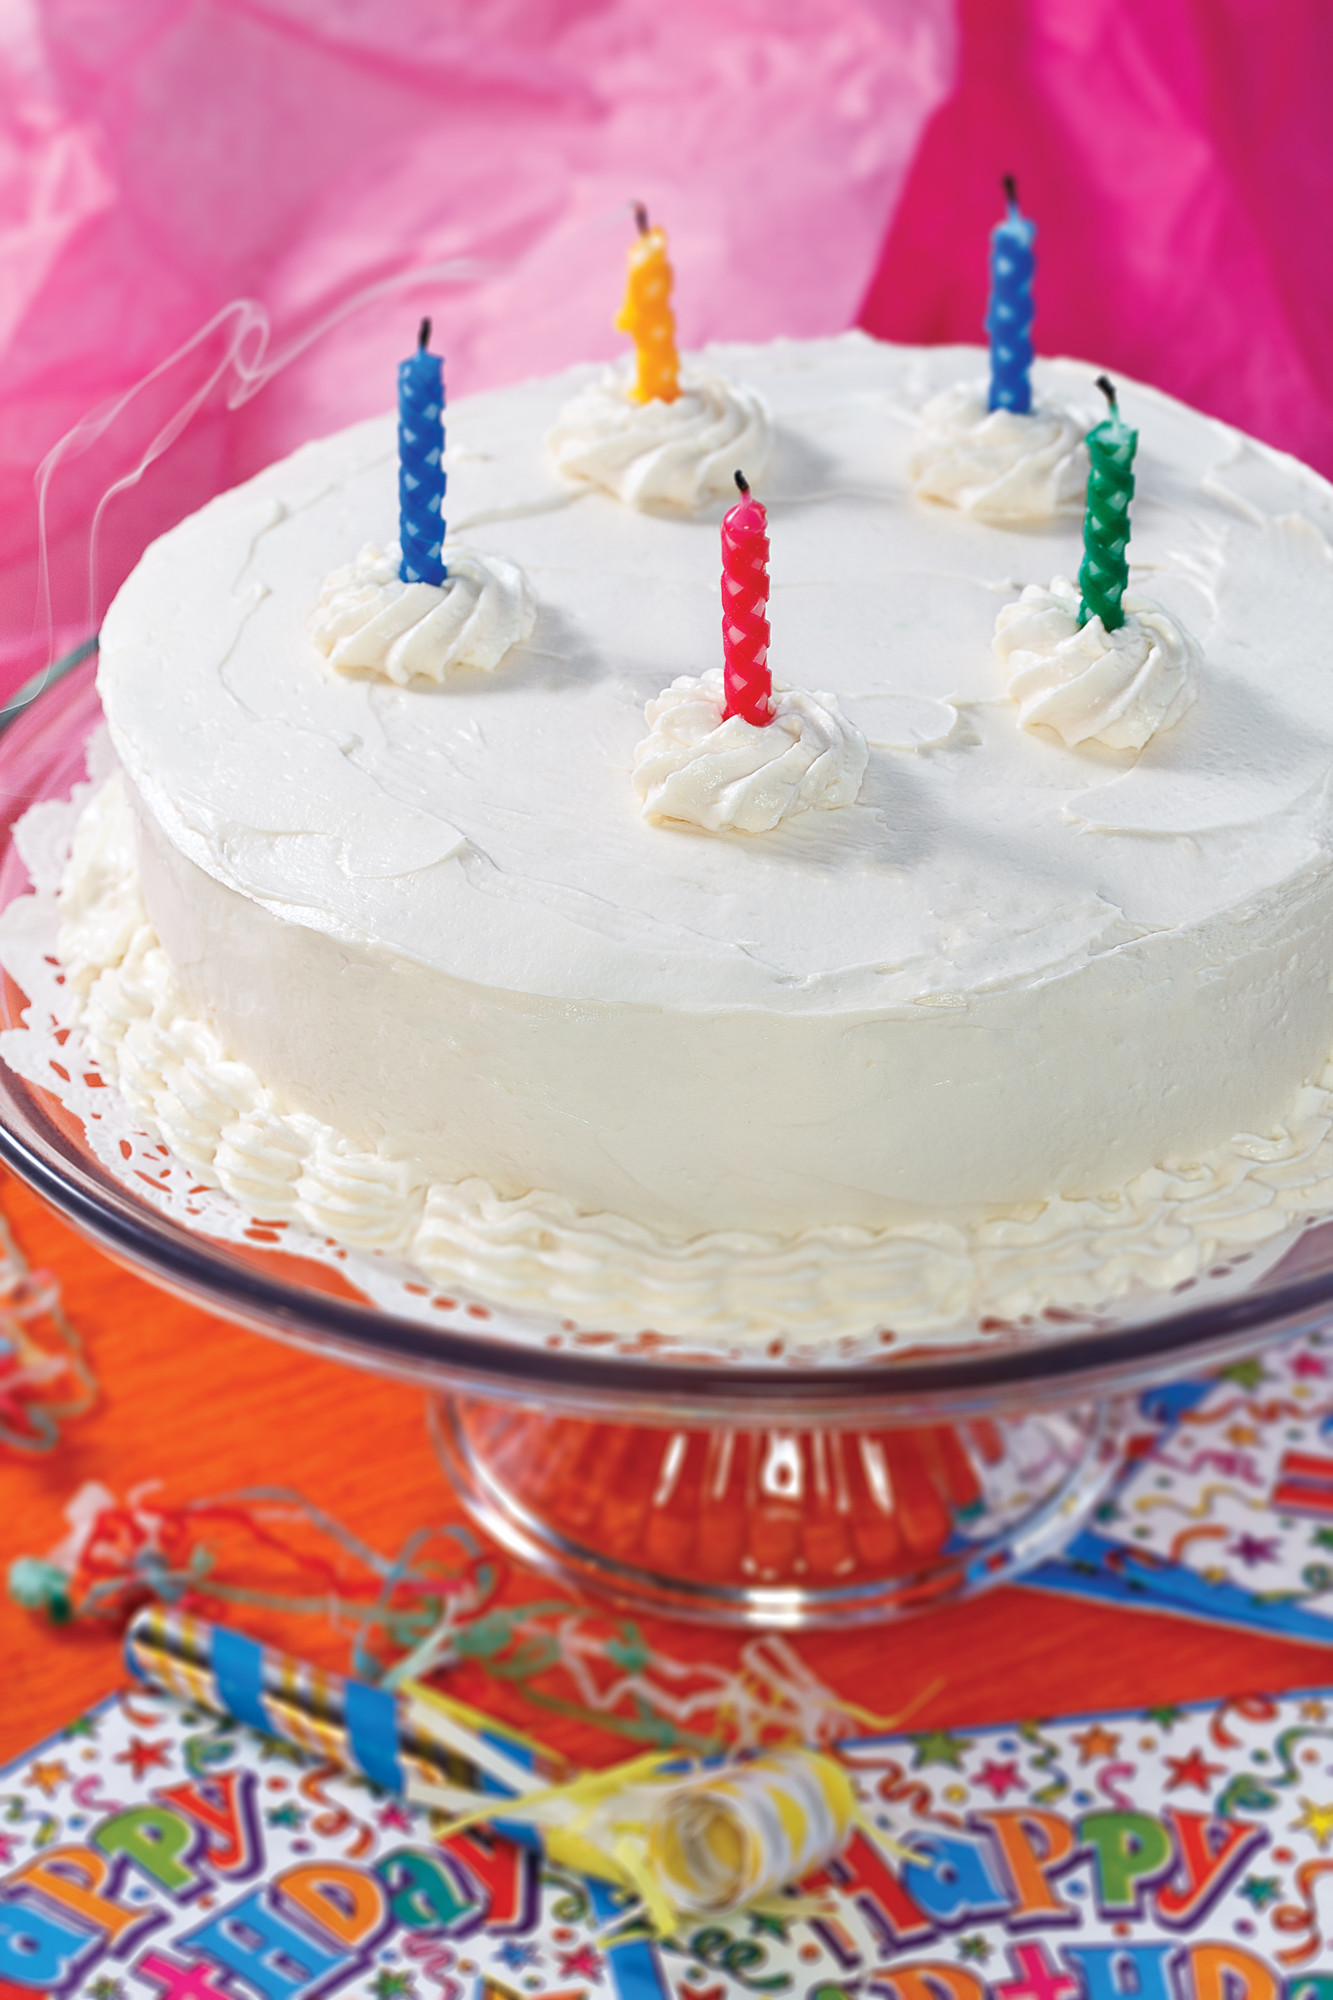 15 Recipes for Great White Birthday Cake